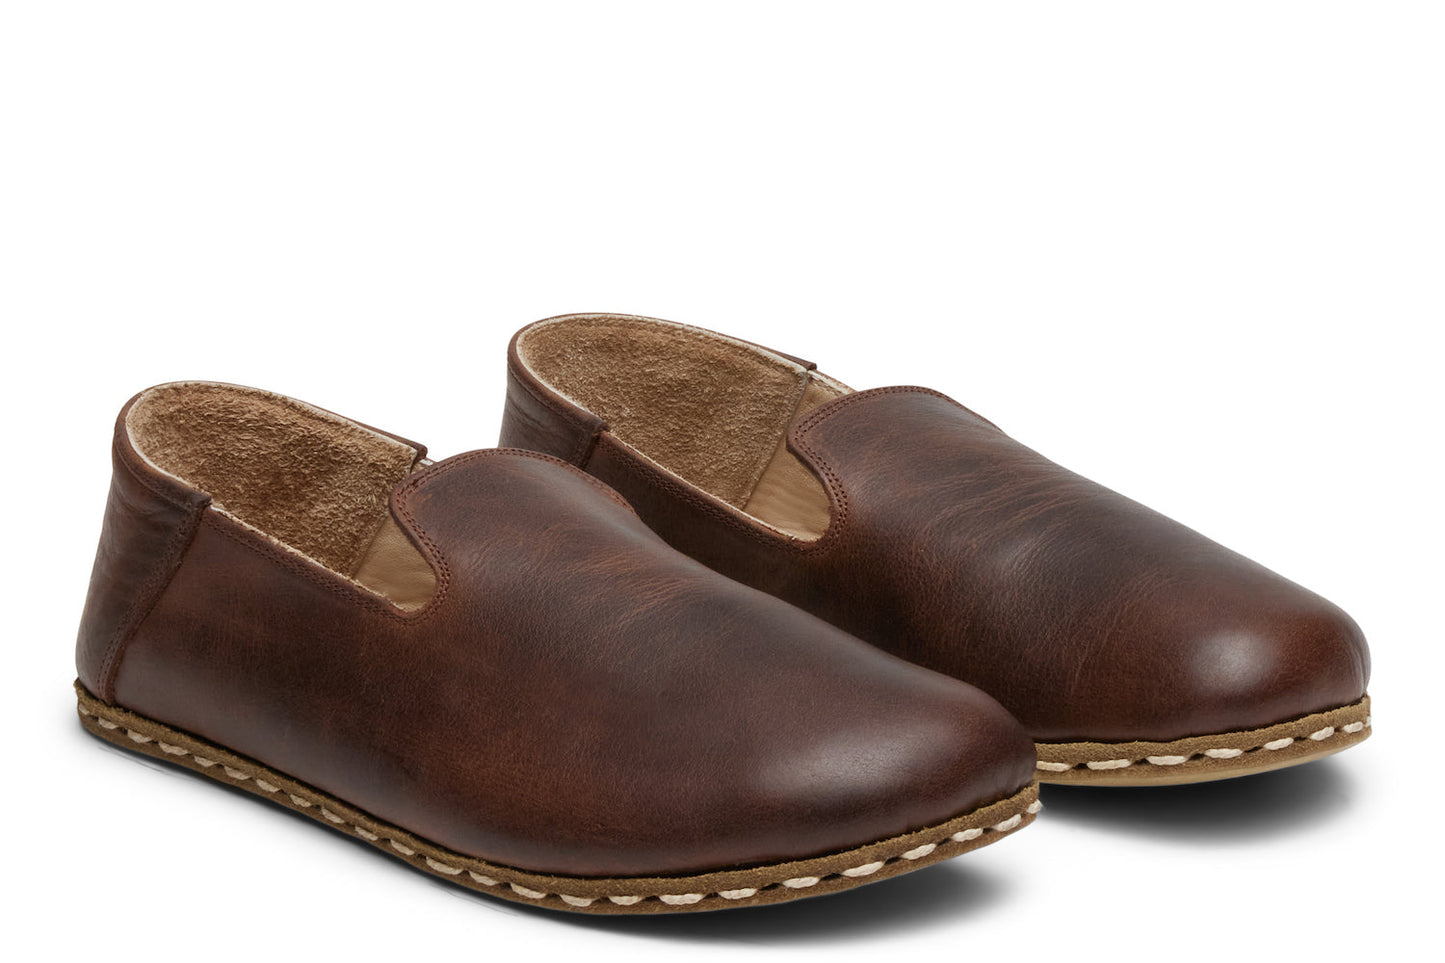 Women's Barefoot Grounding Slip-on Shoes / Coffee by Raum